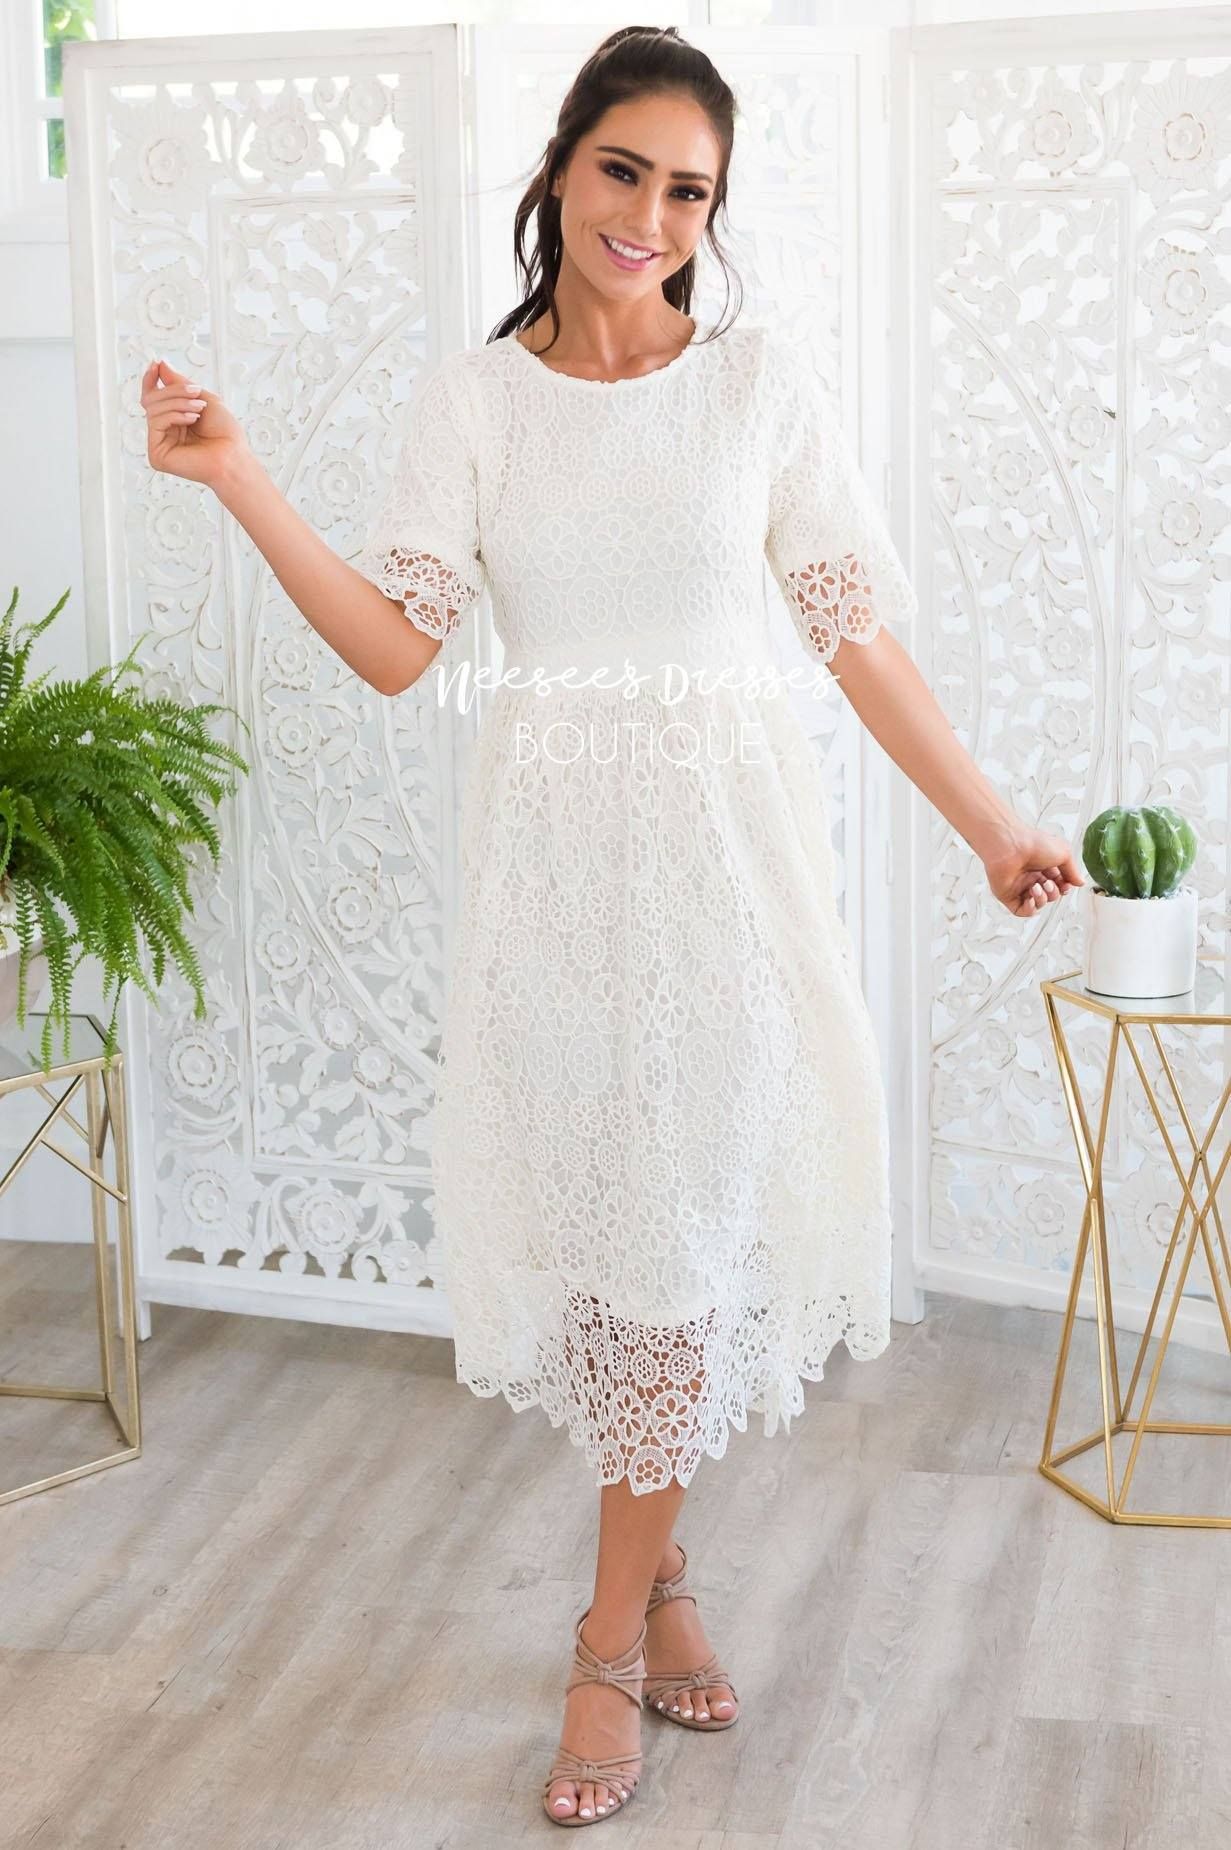 Cream Lace Dress Outfit Ideas